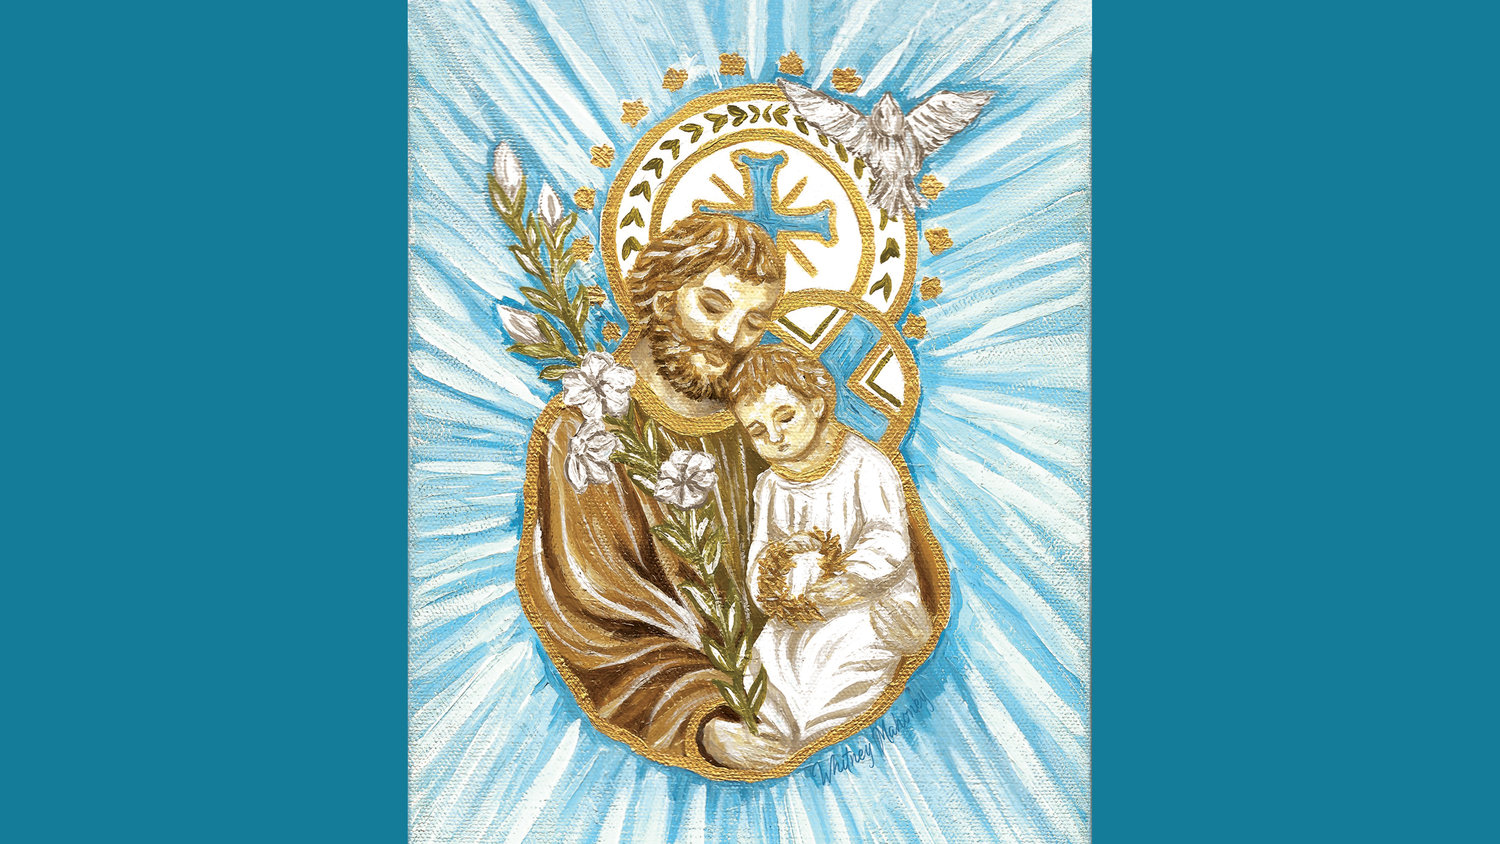 Artist Whitney Maloney painted this original image of St. Joseph and the child Jesus for a prayer card for the Year of St. Joseph.